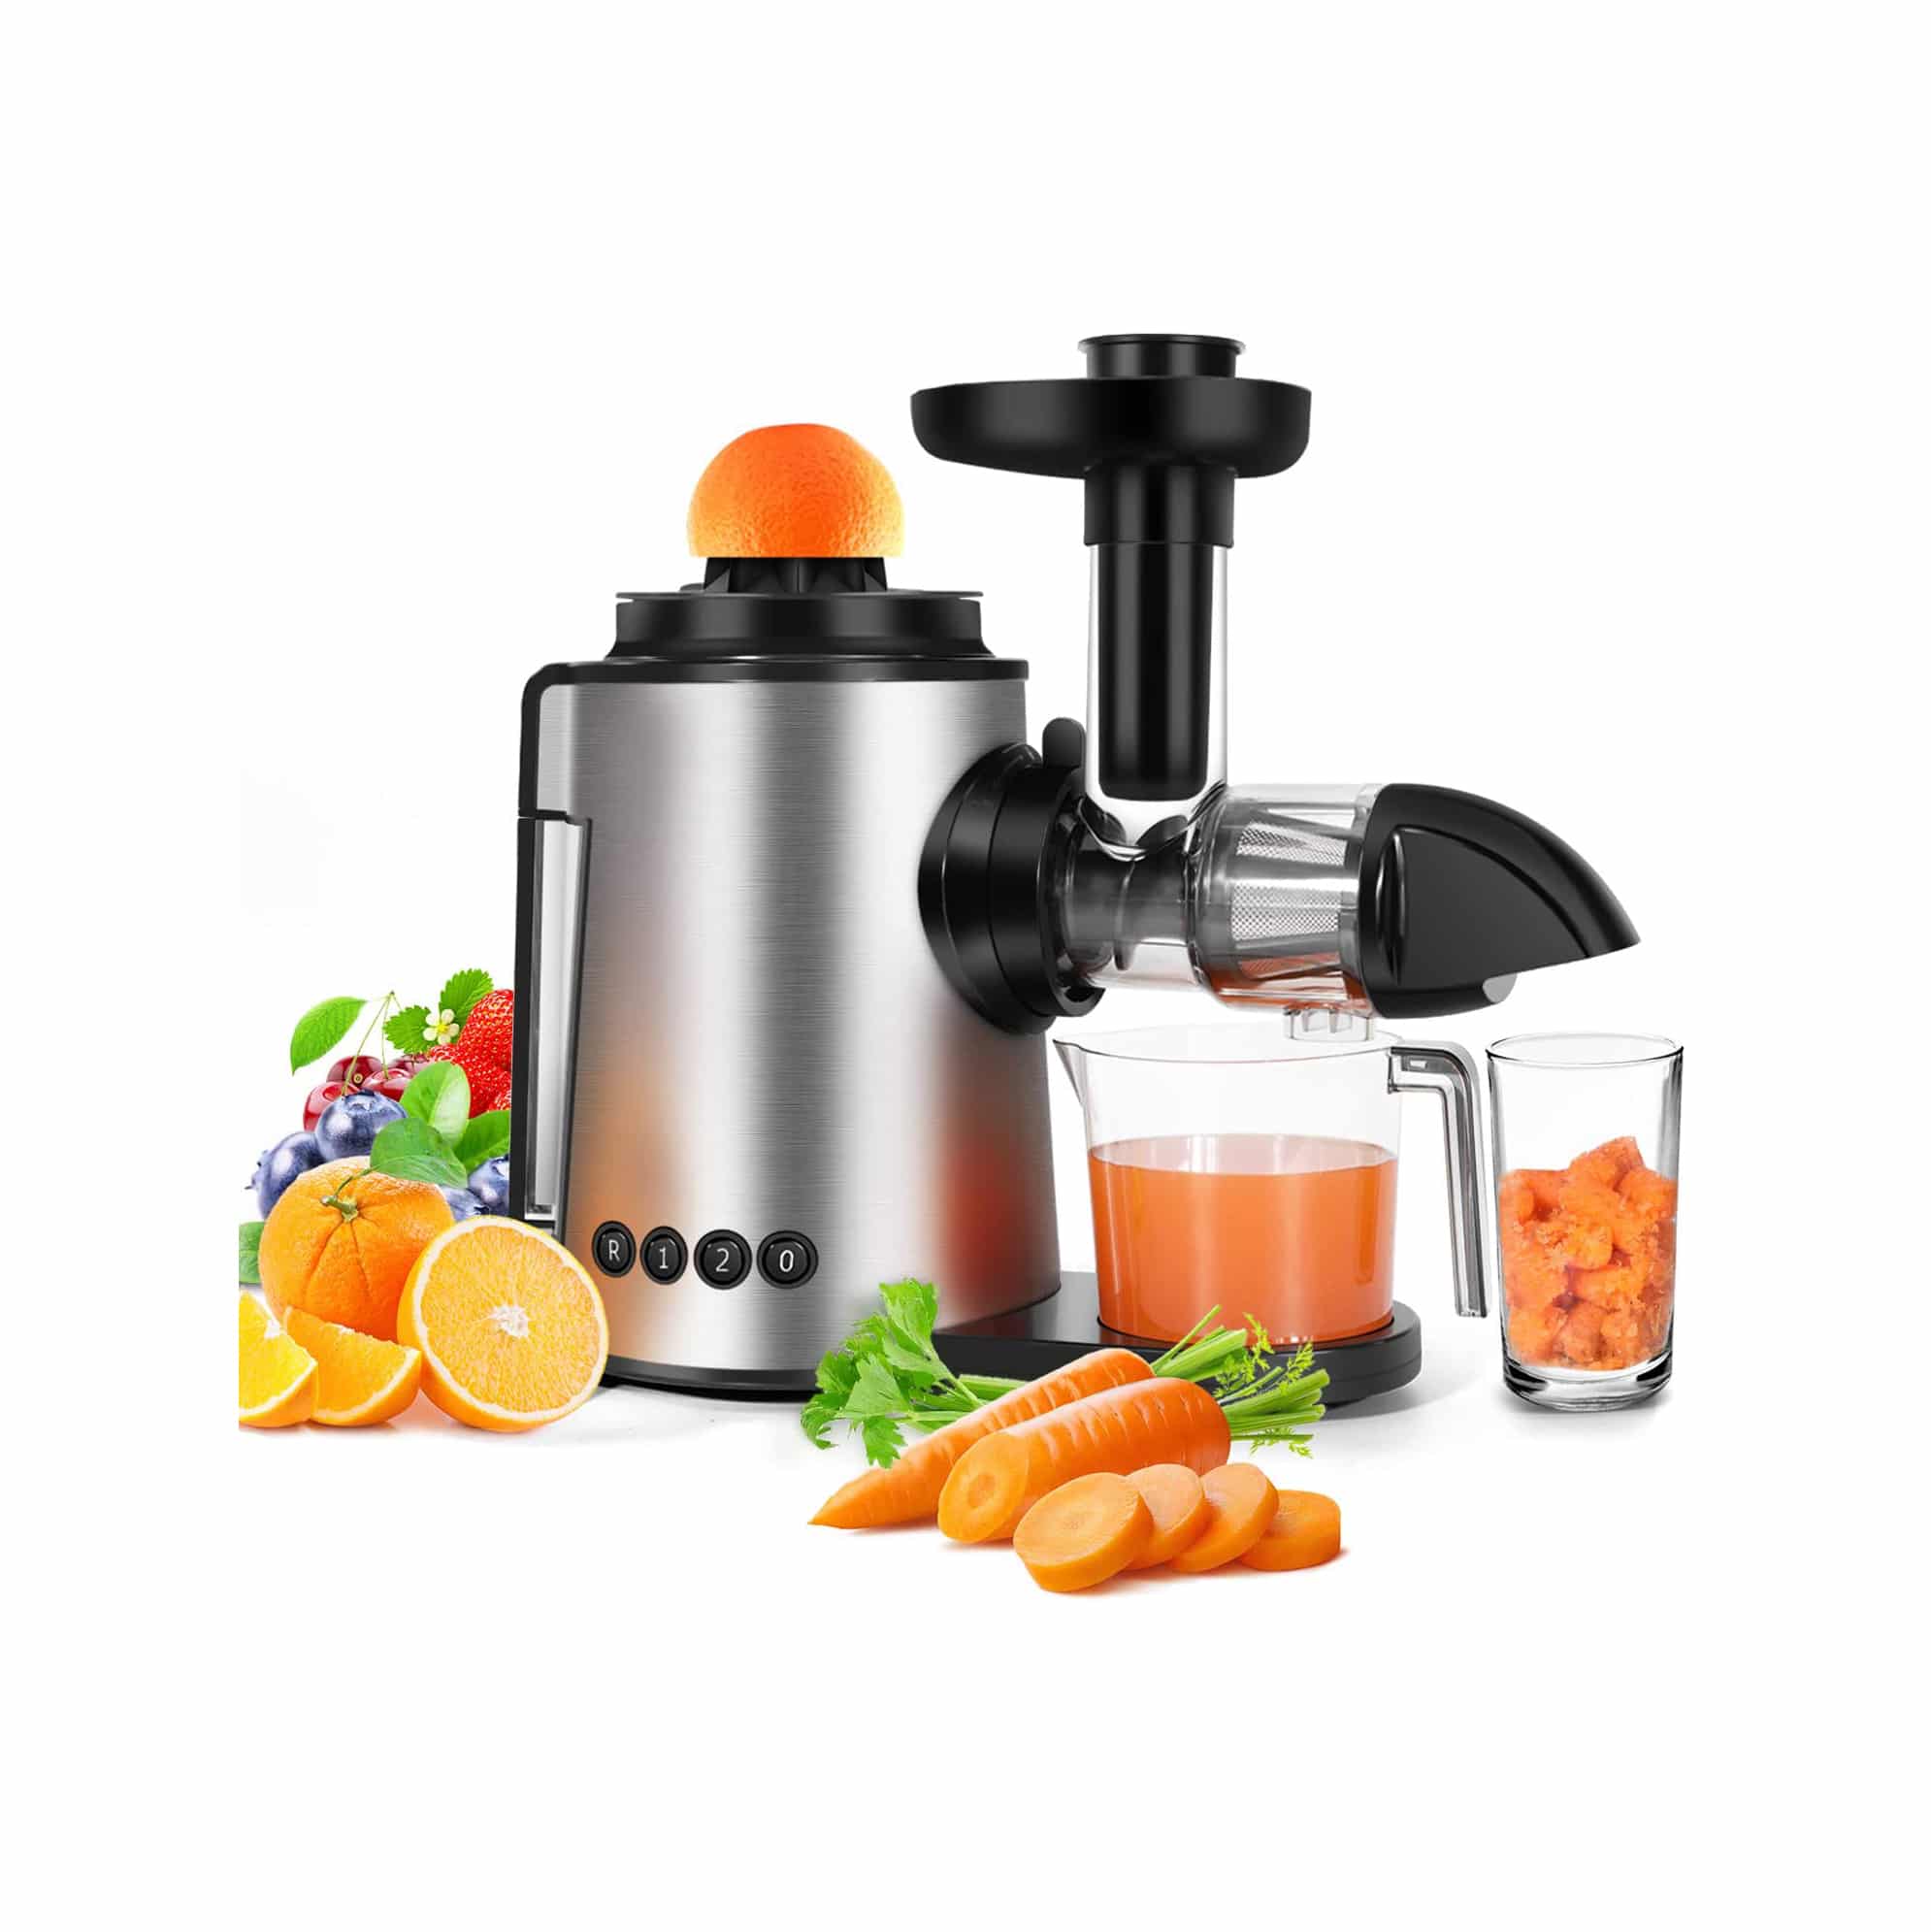 Sagnart 2-In-1 Juicer Mute and Reverse Functions